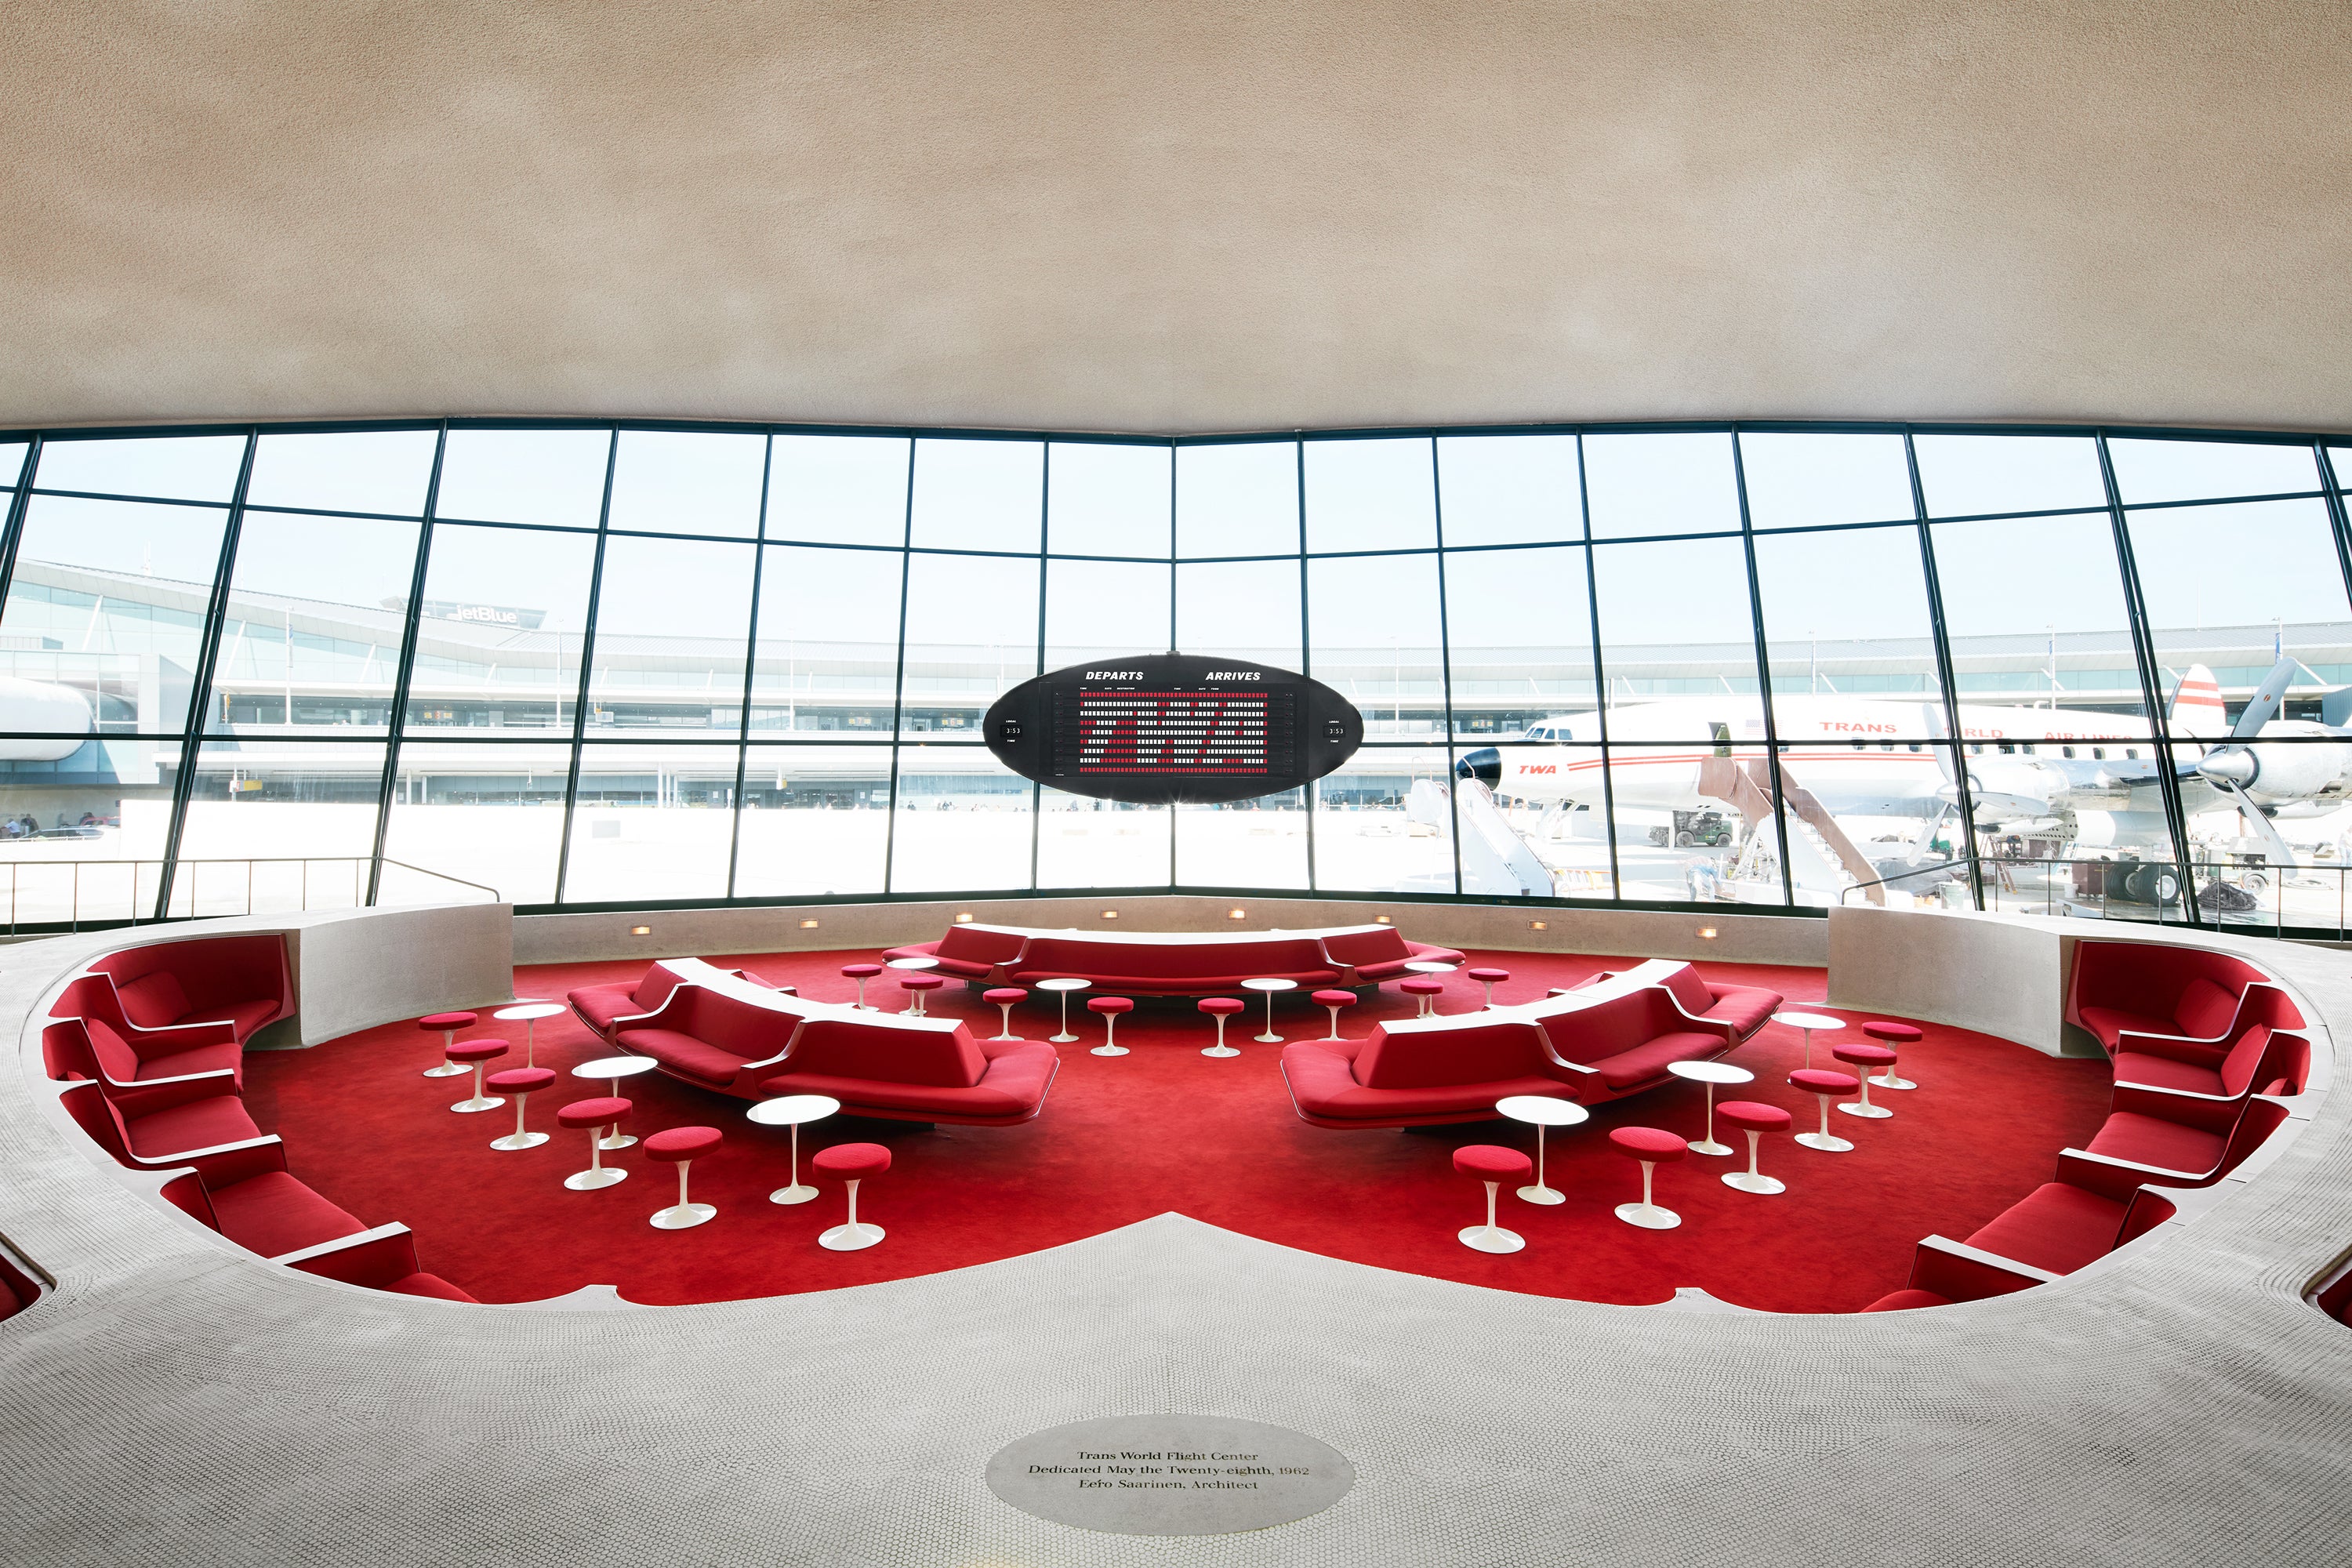 TWA Hotel JFK: My Second & Last Stay - One Mile at a Time